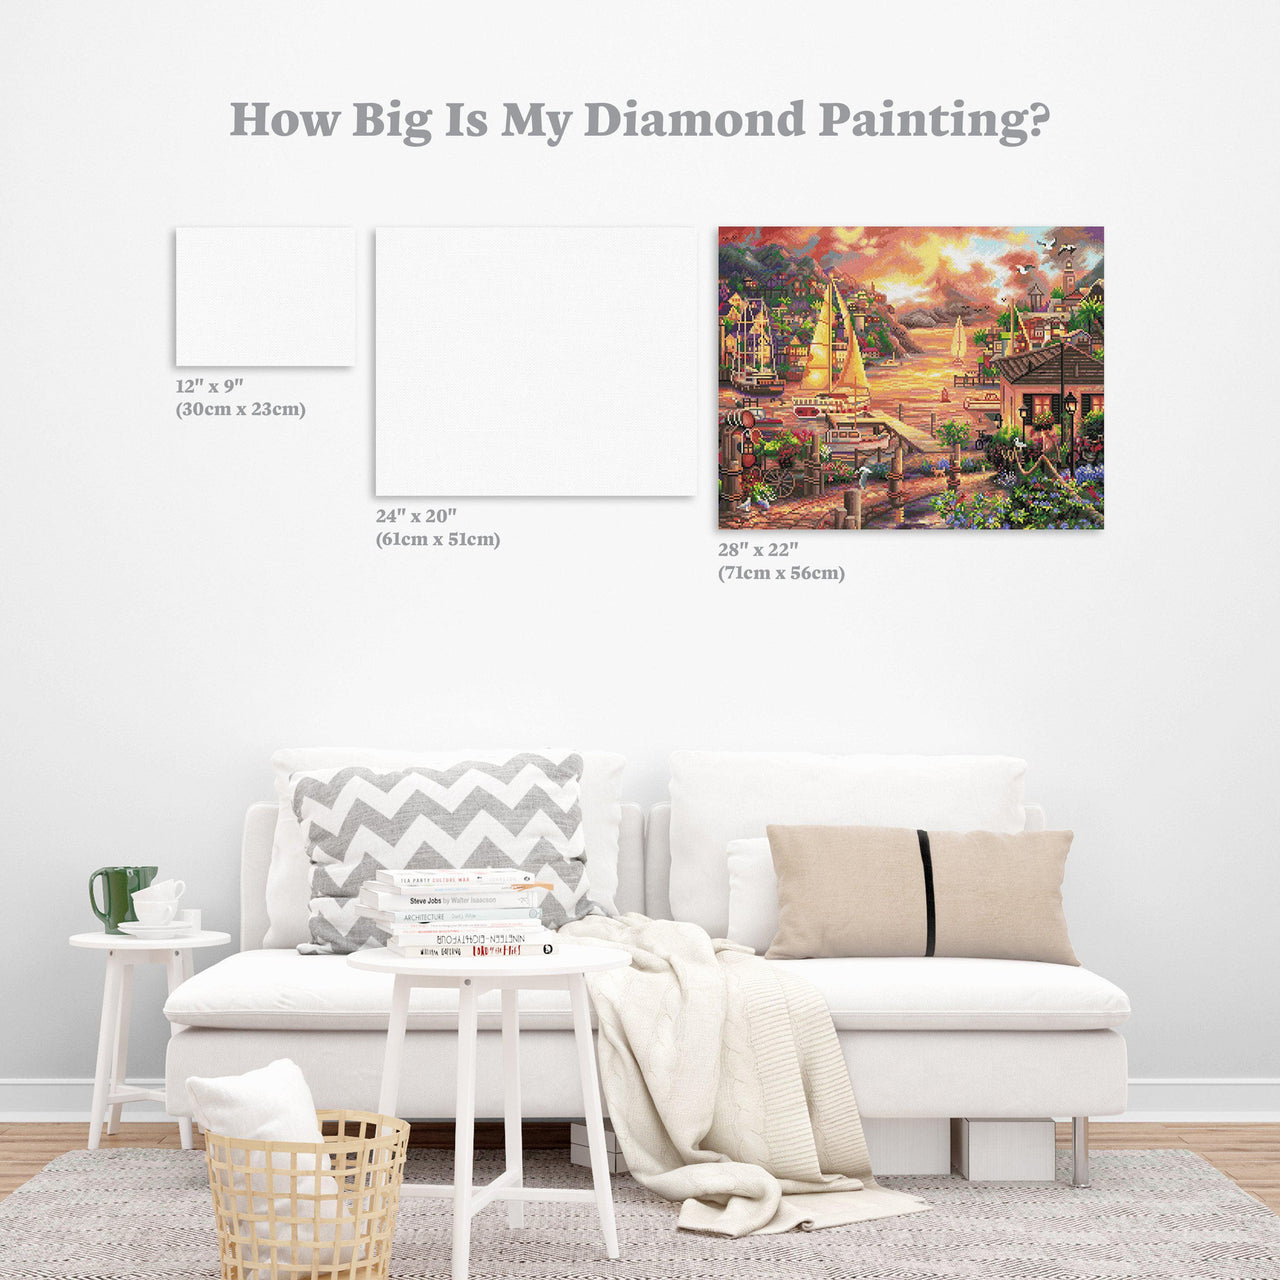 Diamond Painting Catching Dreams 22" x 28″ (56cm x 71cm) / Round With 47 Colors Including 2 ABs / 49,896